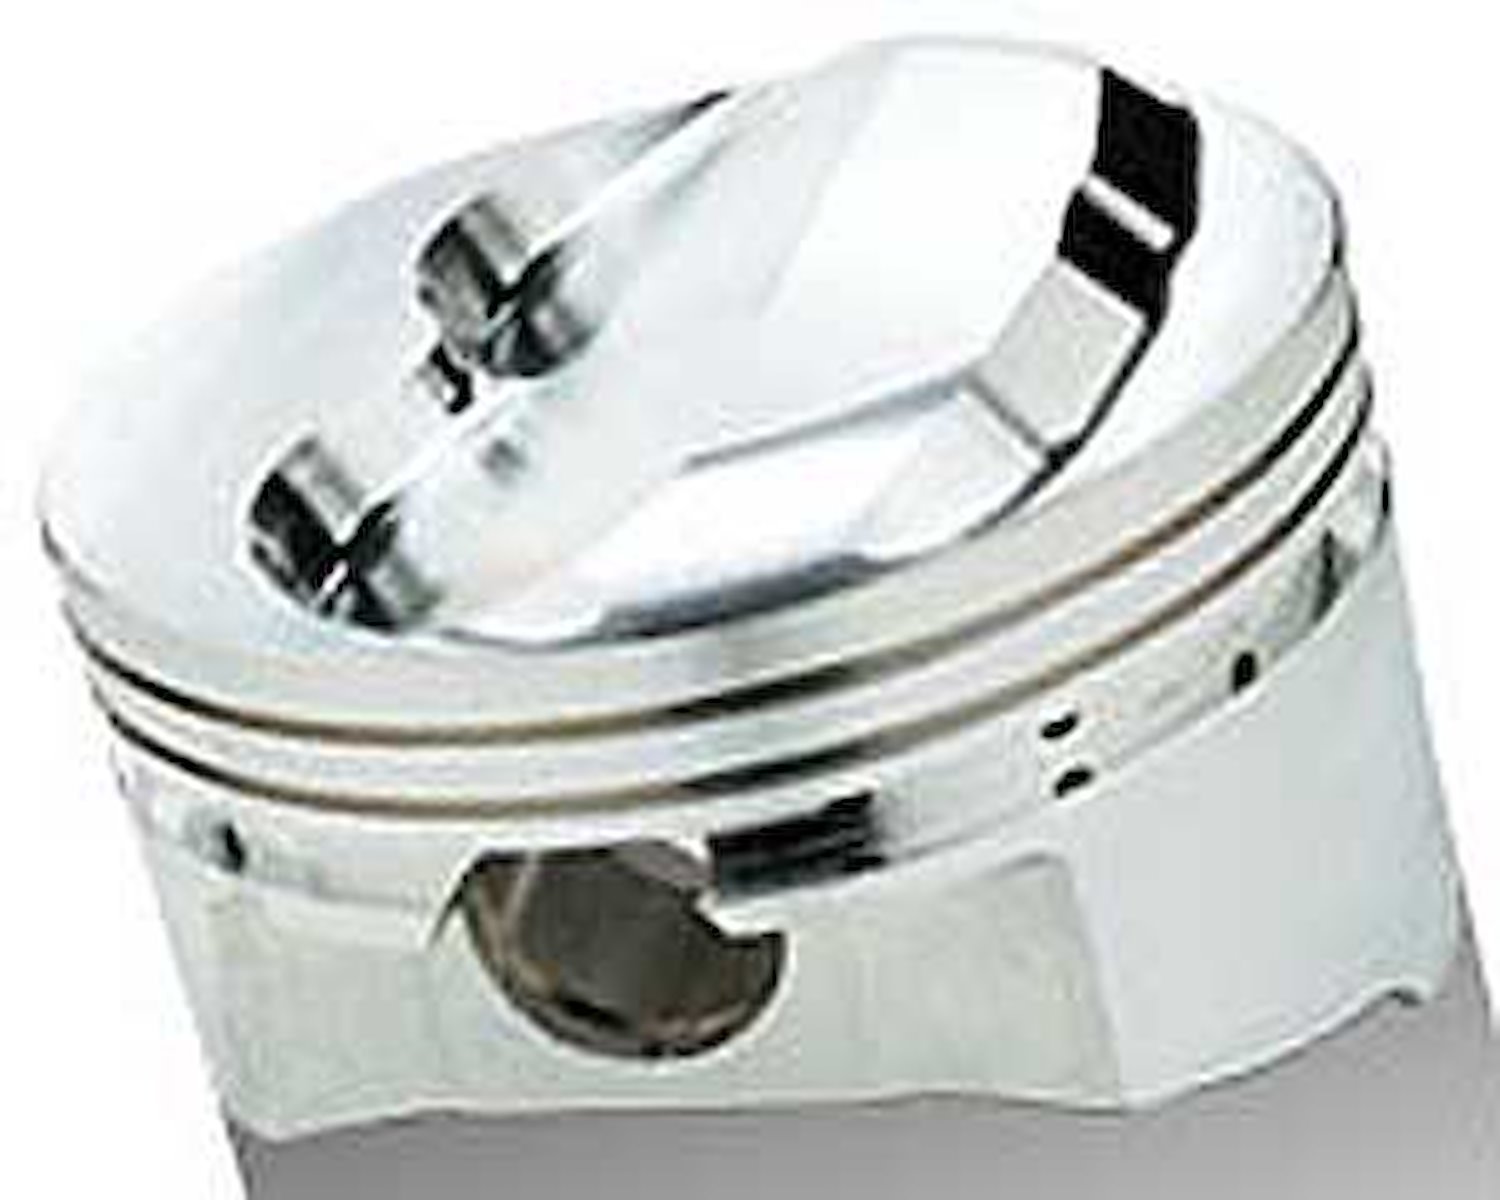 SRP Dome Pistons for Small Block Chevy Bore 4.040"